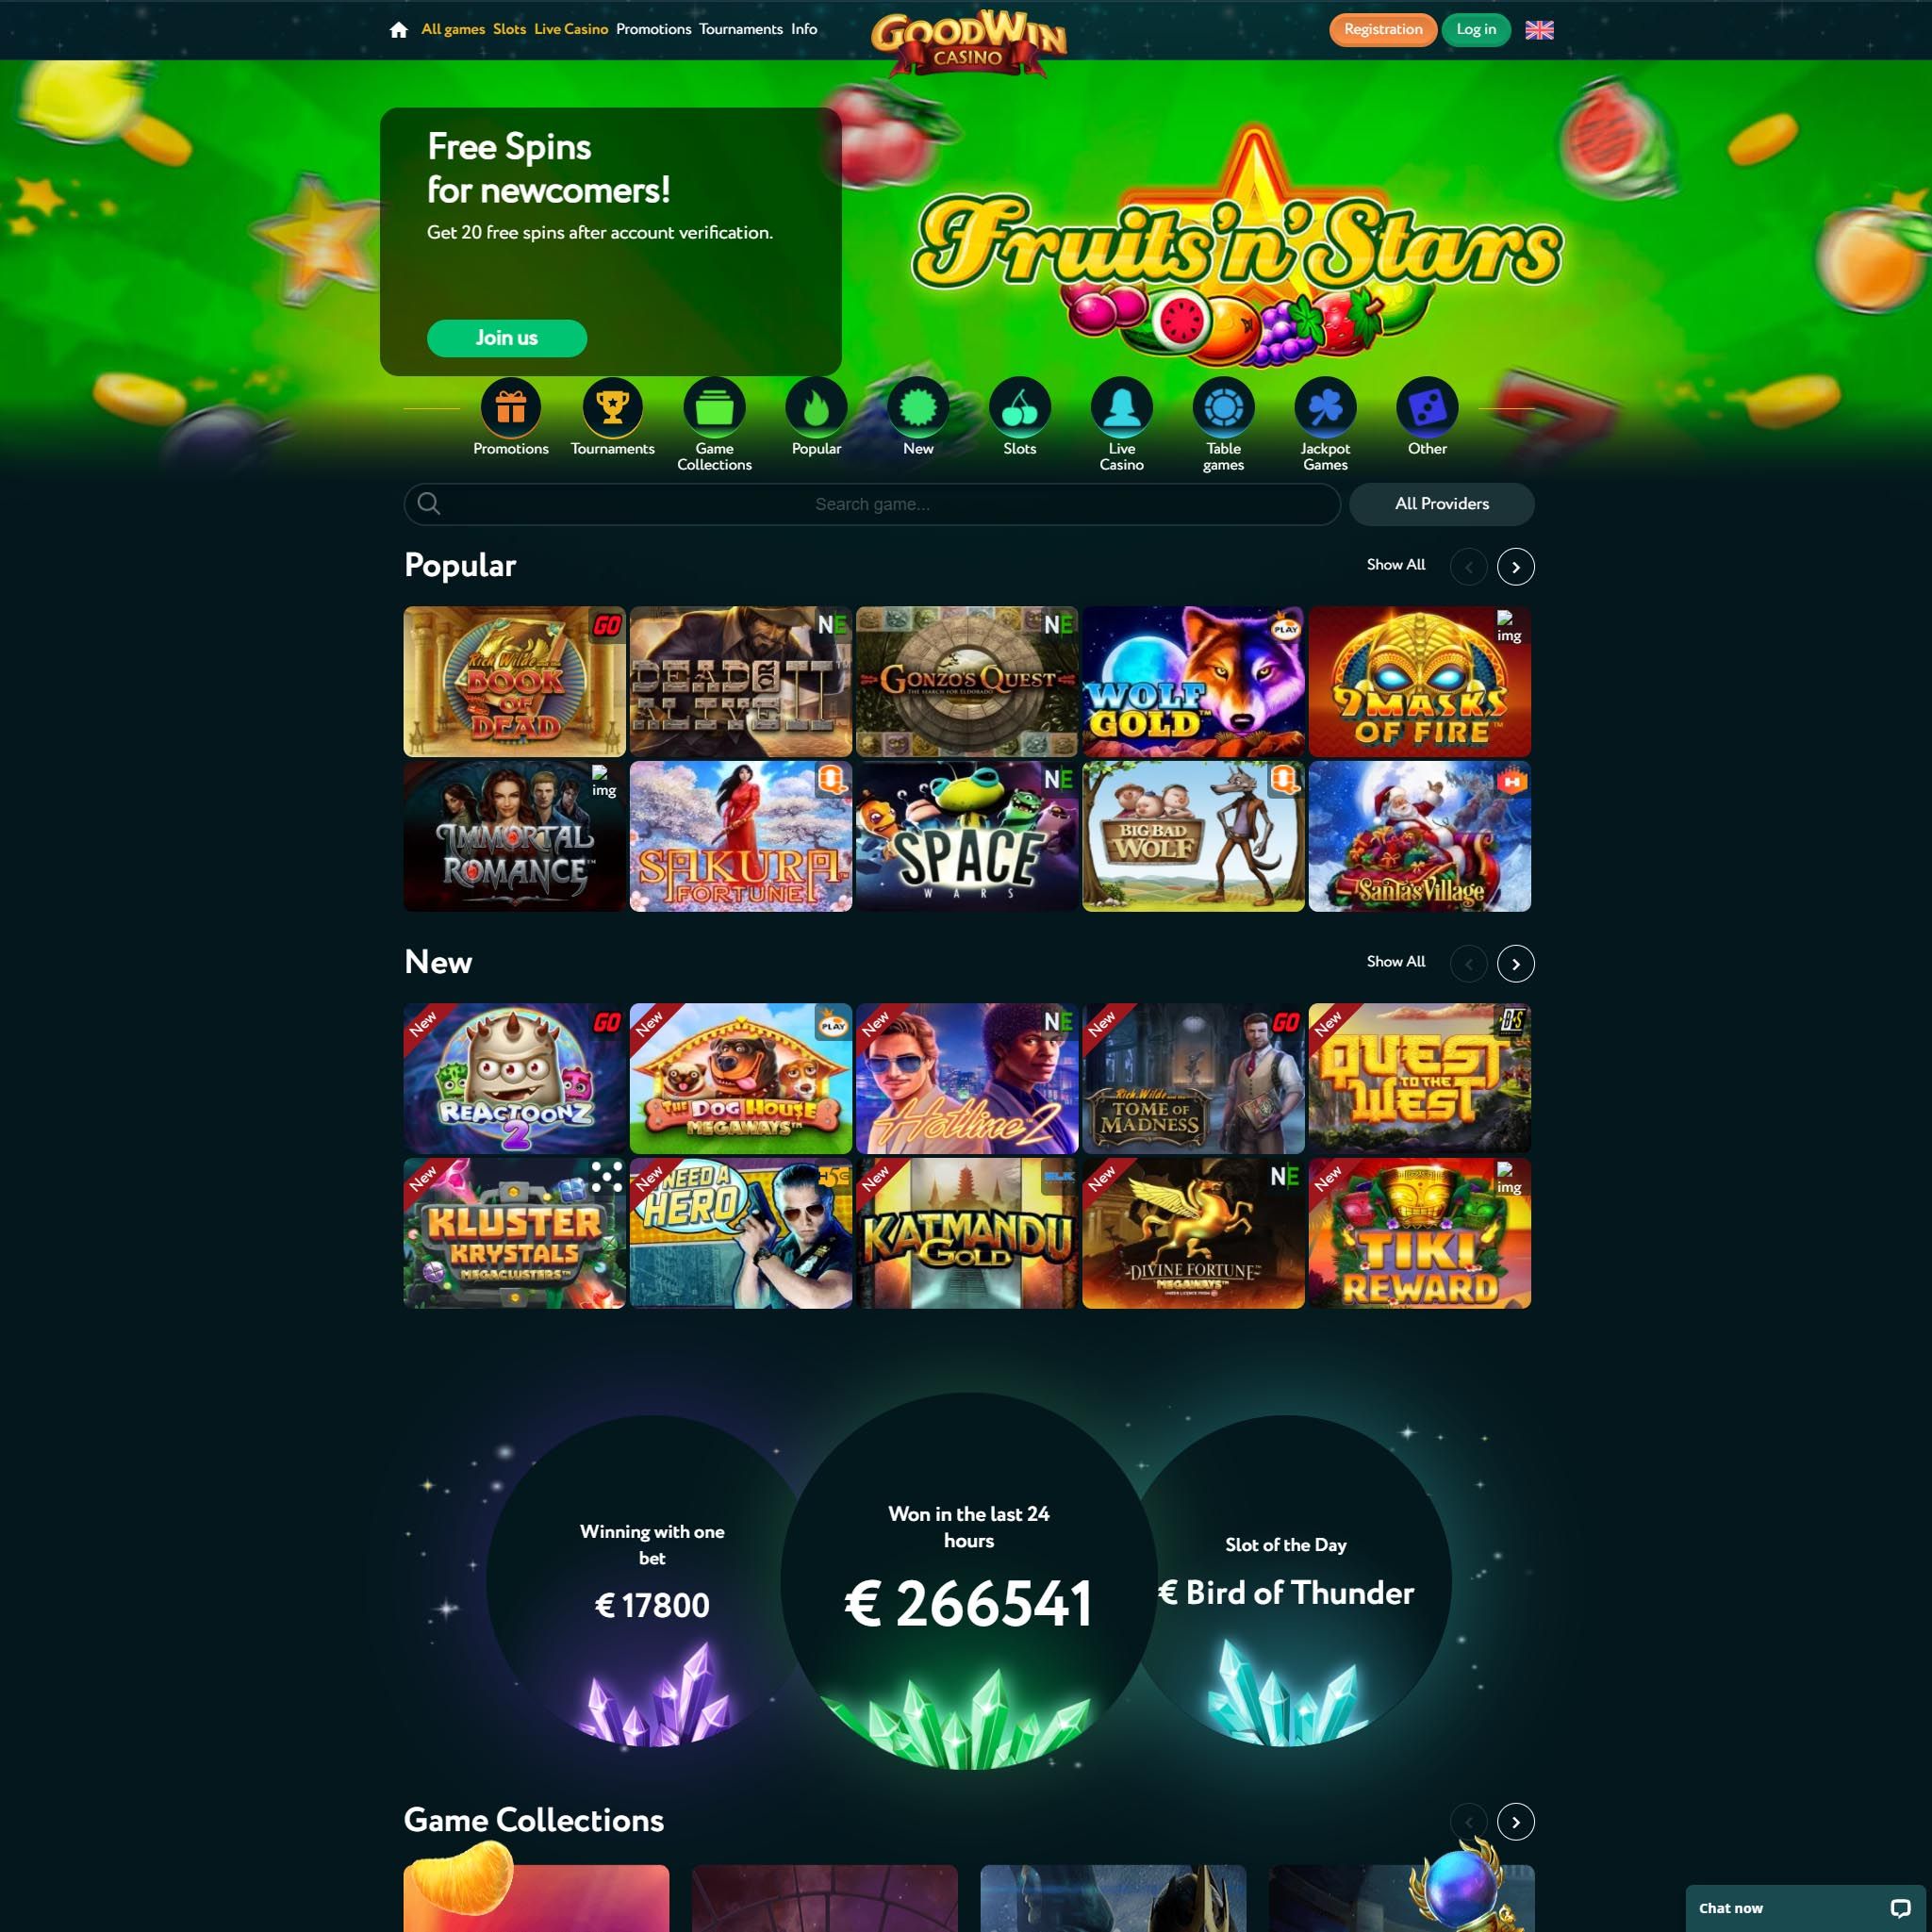 Goodwin Casino review by Mr. Gamble